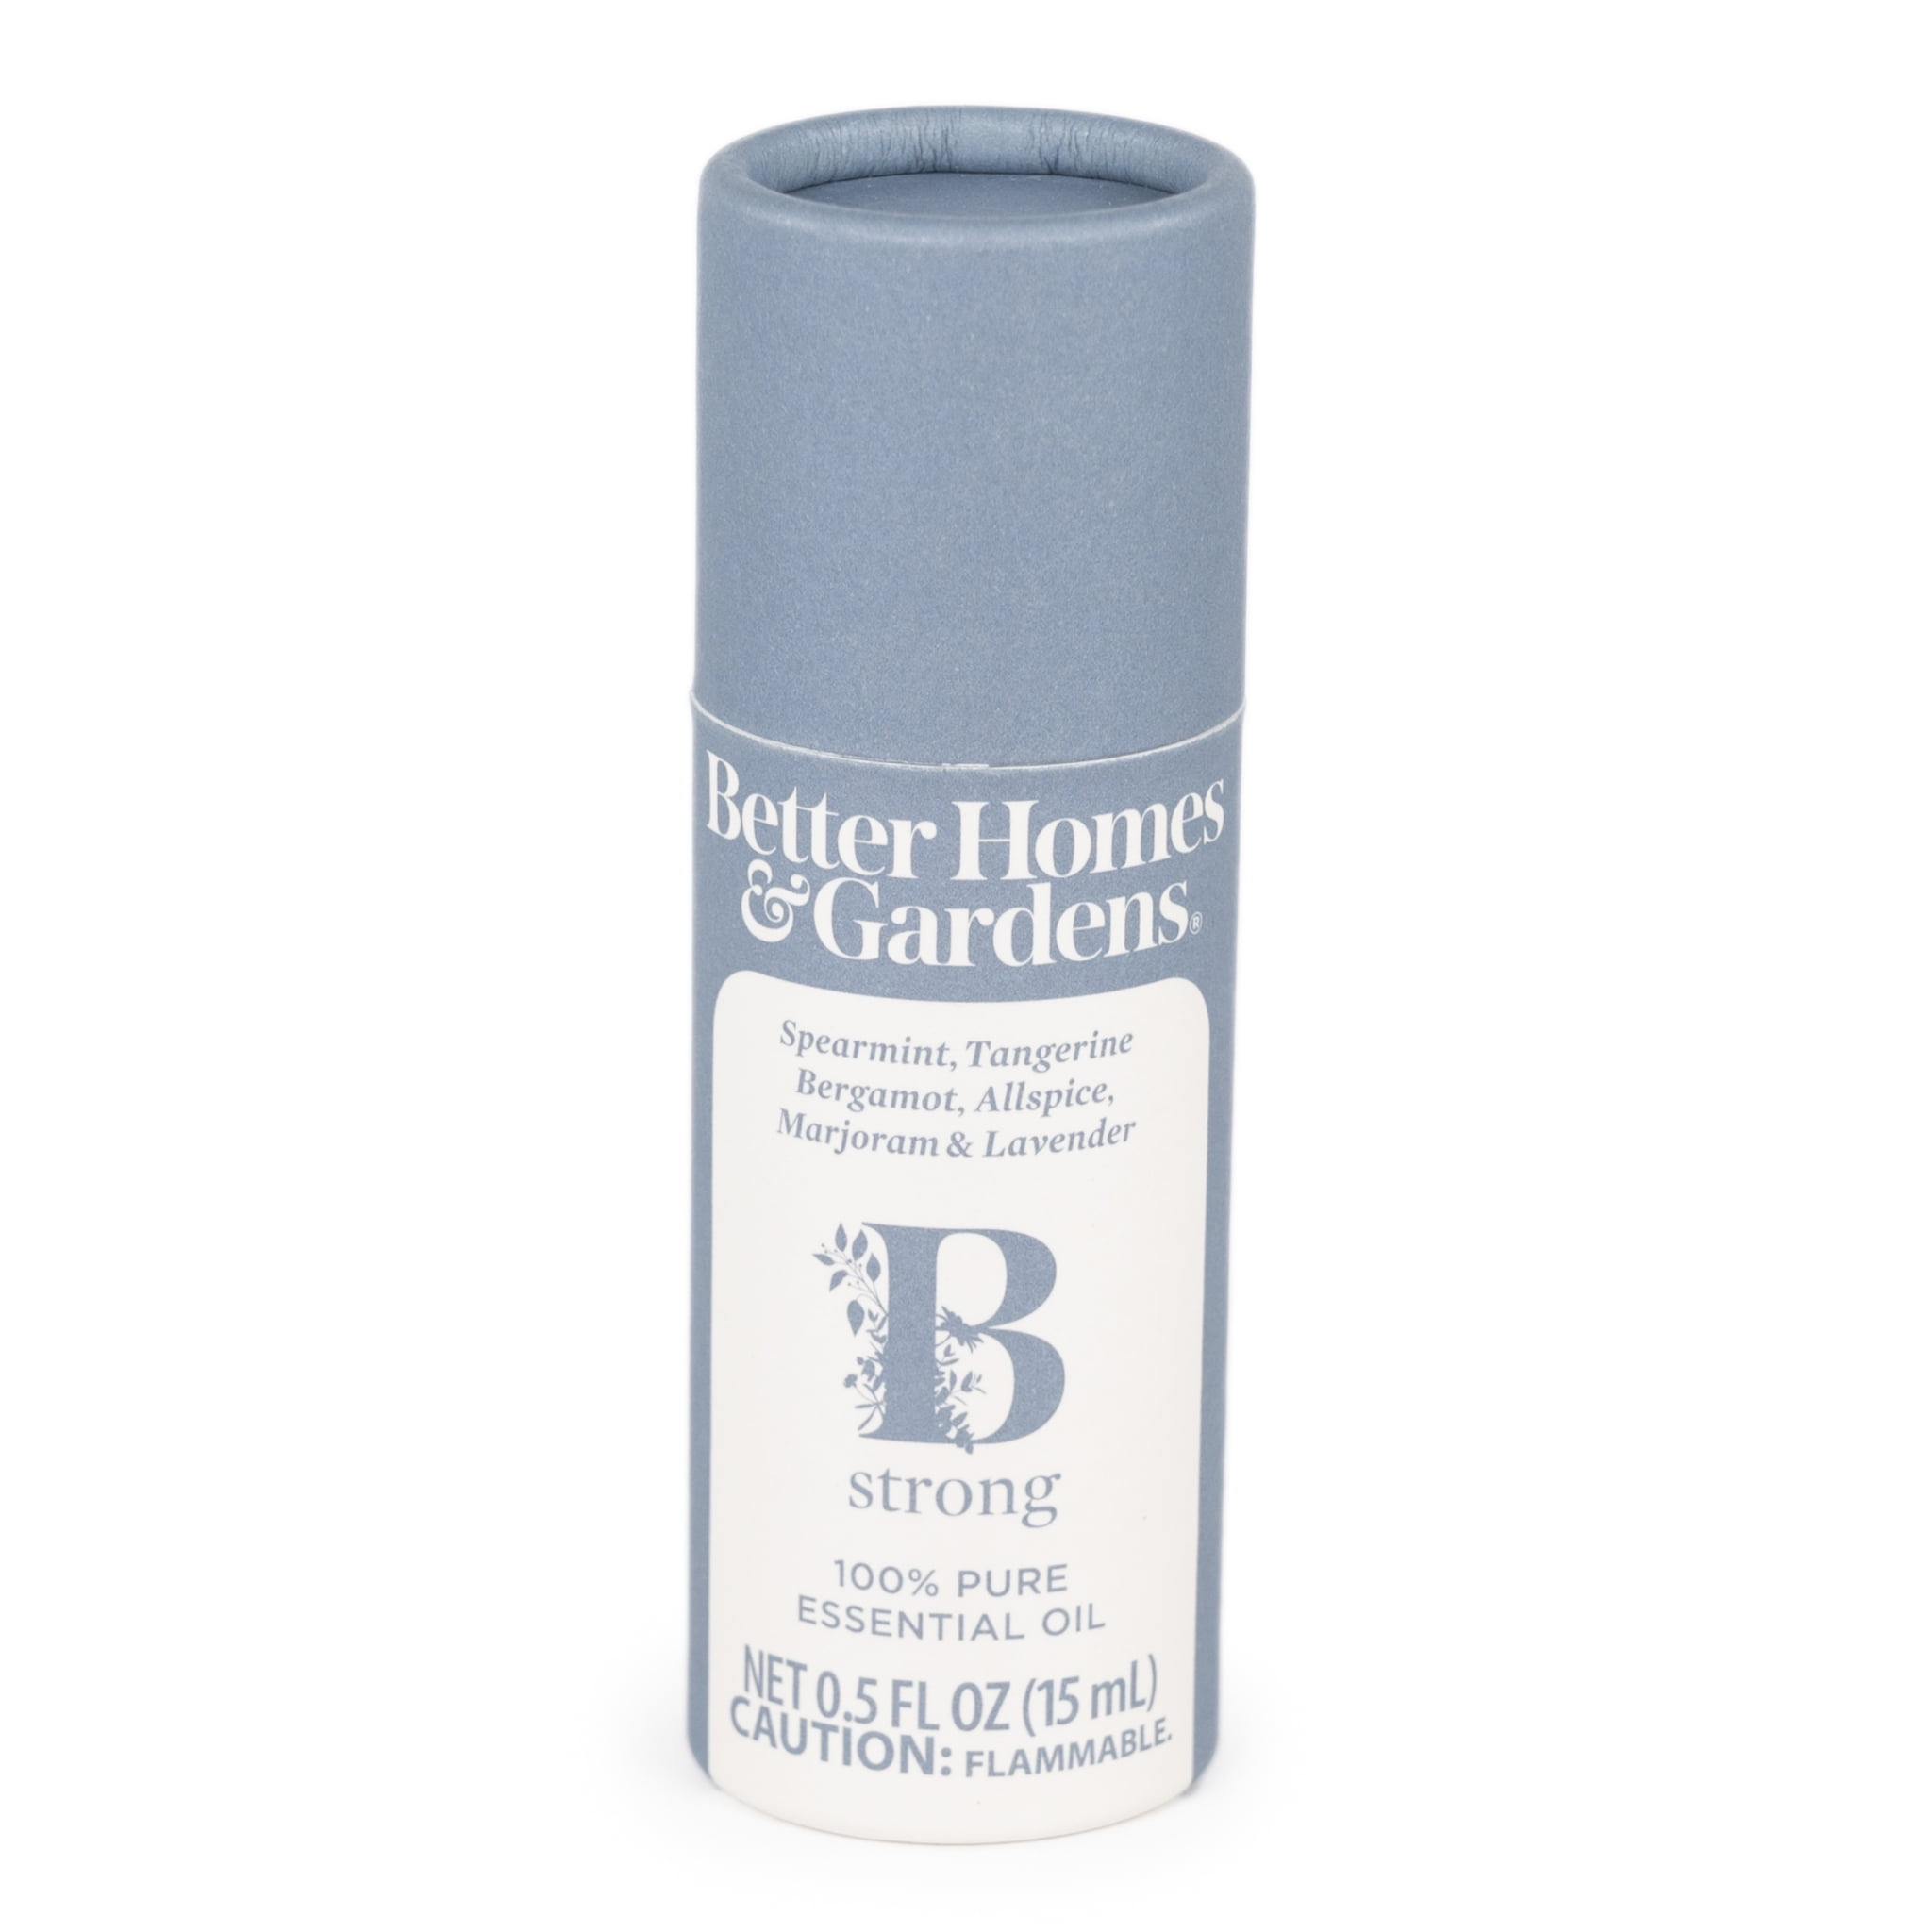 Better Homes & Gardens 100% Pure Essential Oil: B Strong, 15mL